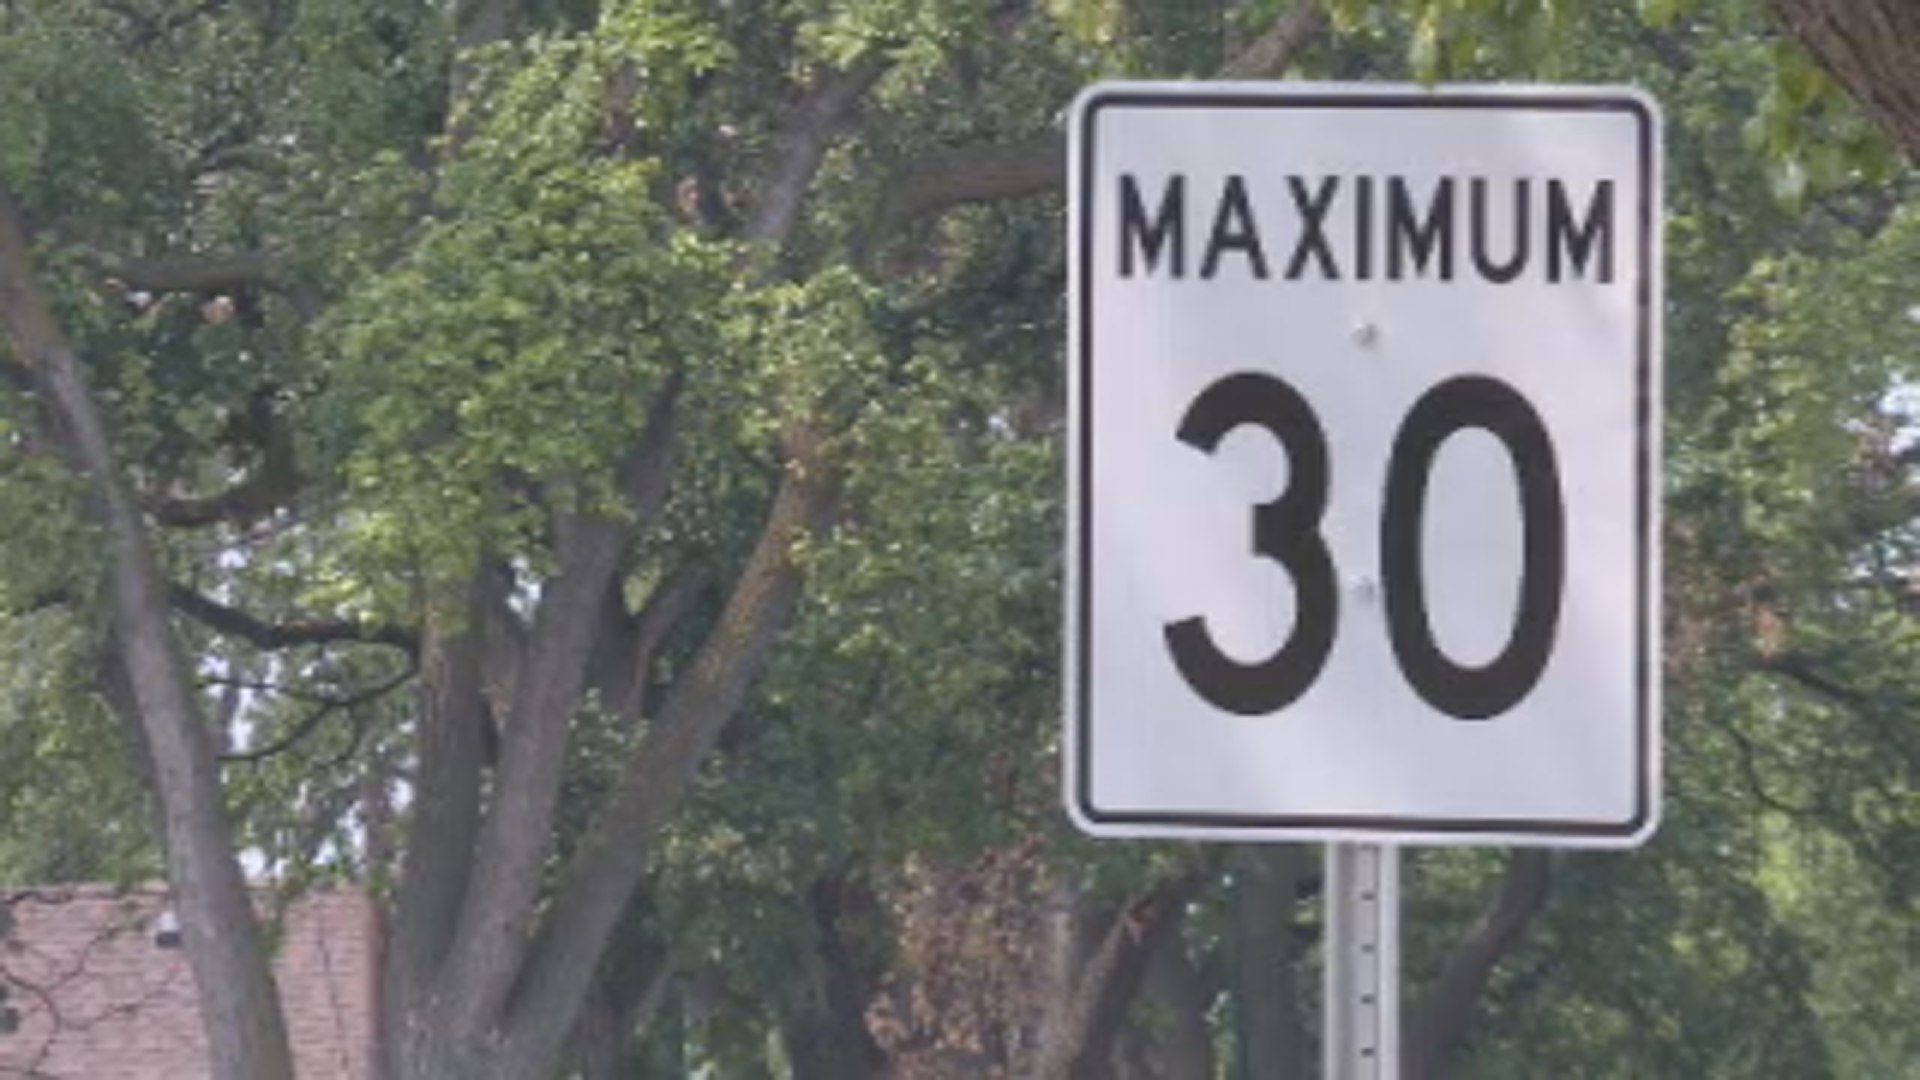 Fines would be $1,000 for speeders going 89 km/h over the limit.